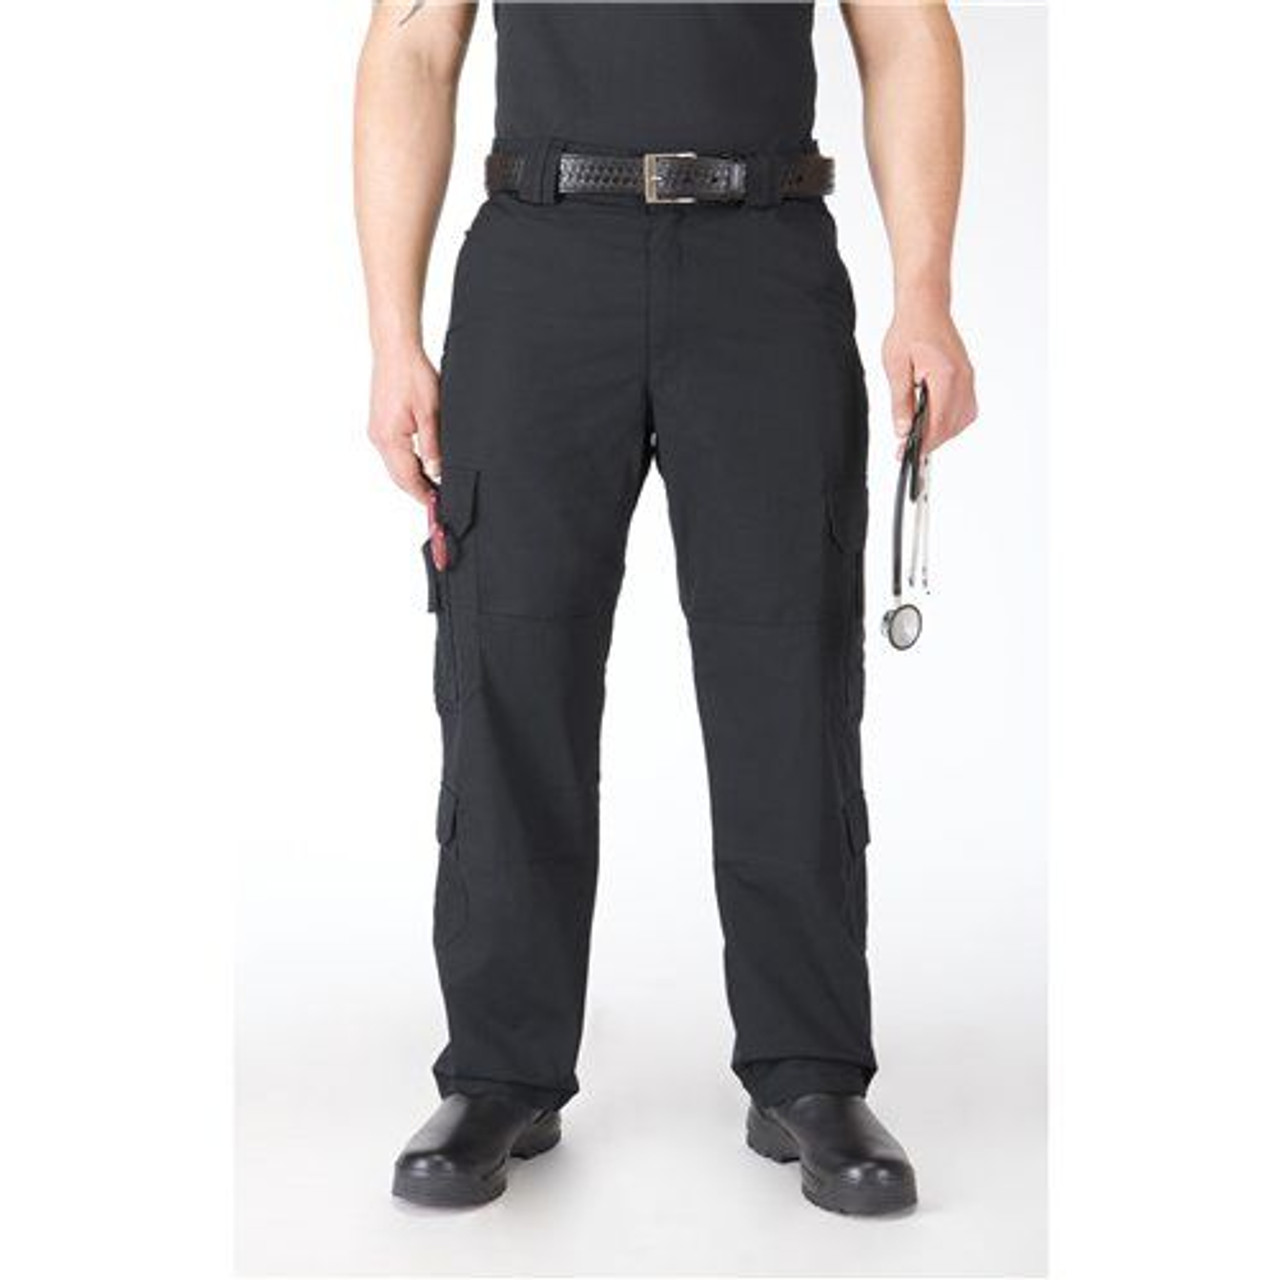 5.11 EMS Tactlite Tactical Pants | SGT TROYS | FREE SHIPPING